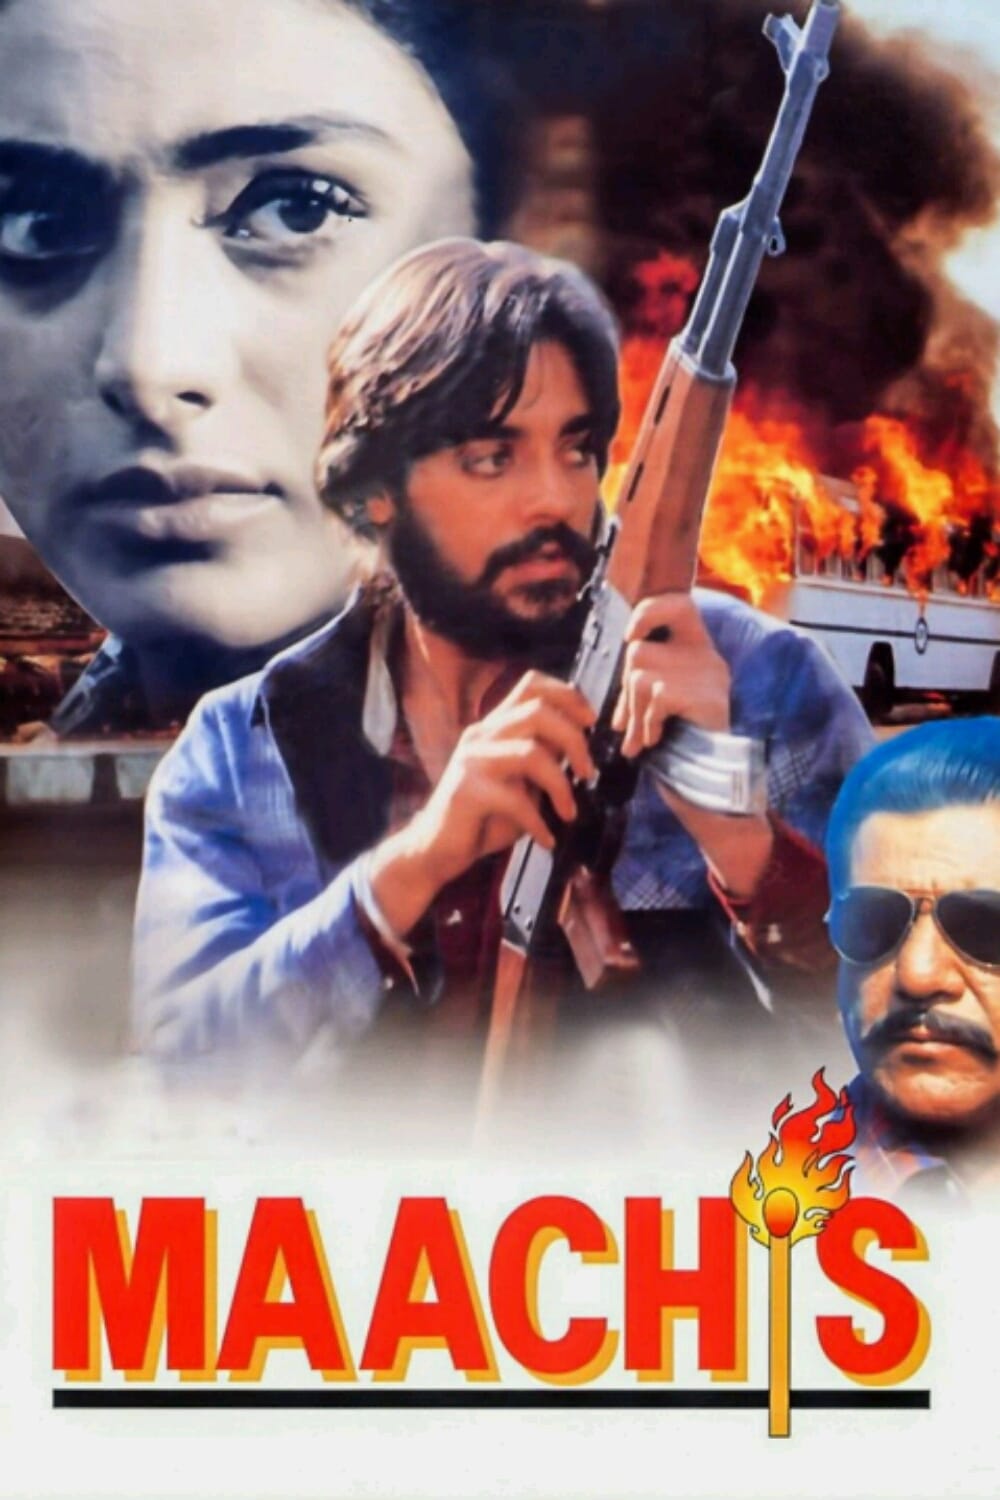 Poster for the movie "Maachis"